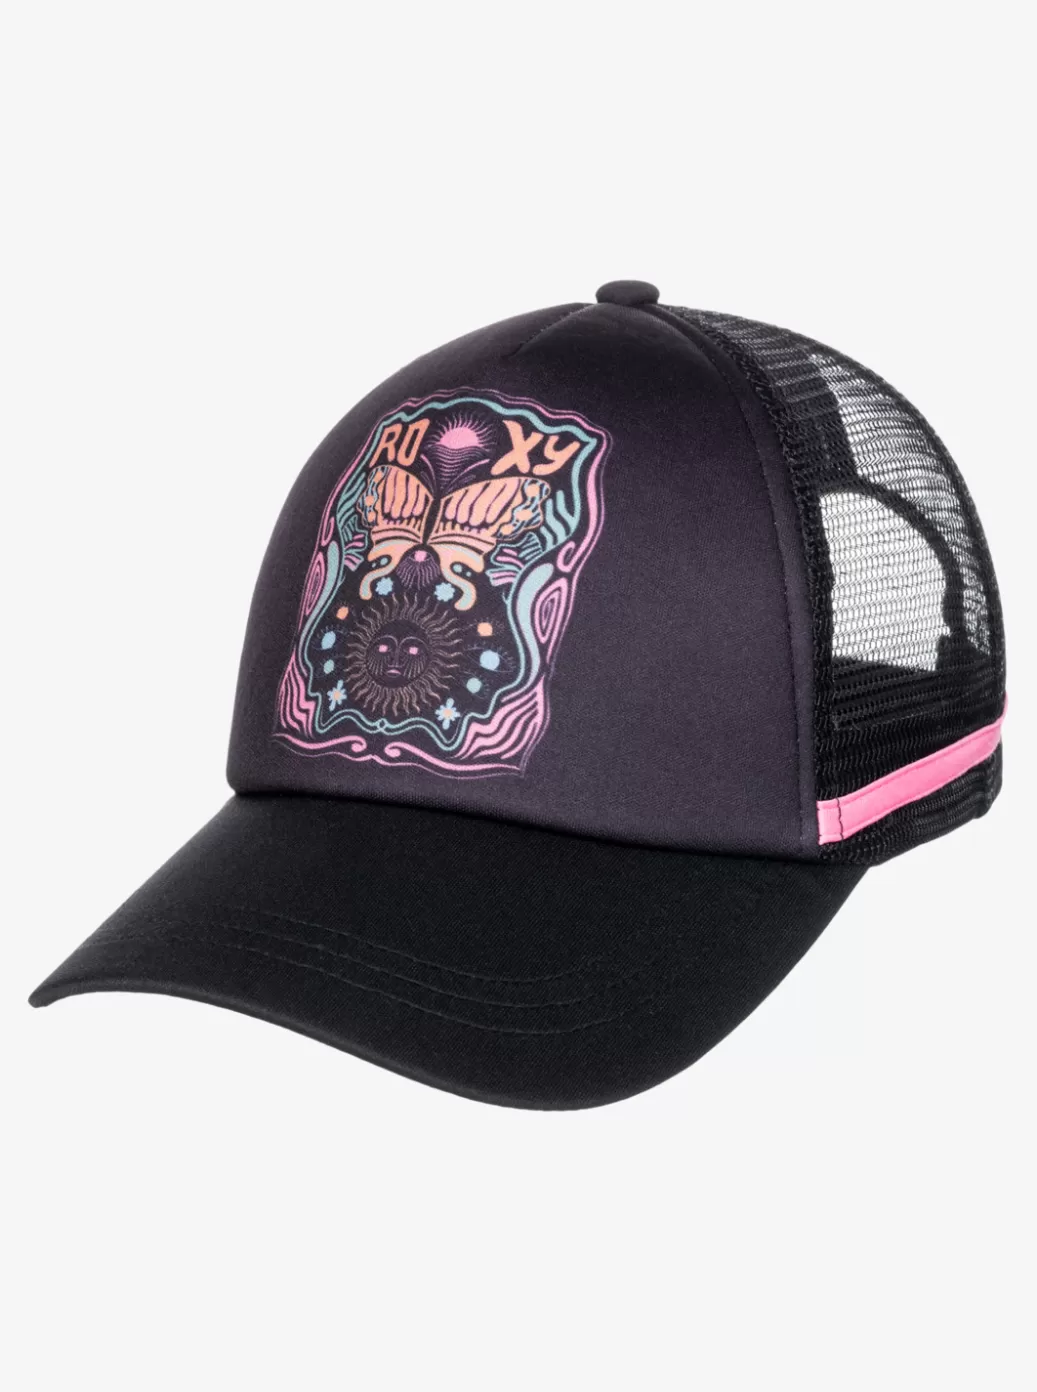 Hats | WOMEN ROXY Dig This Trucker Hat Anthracite